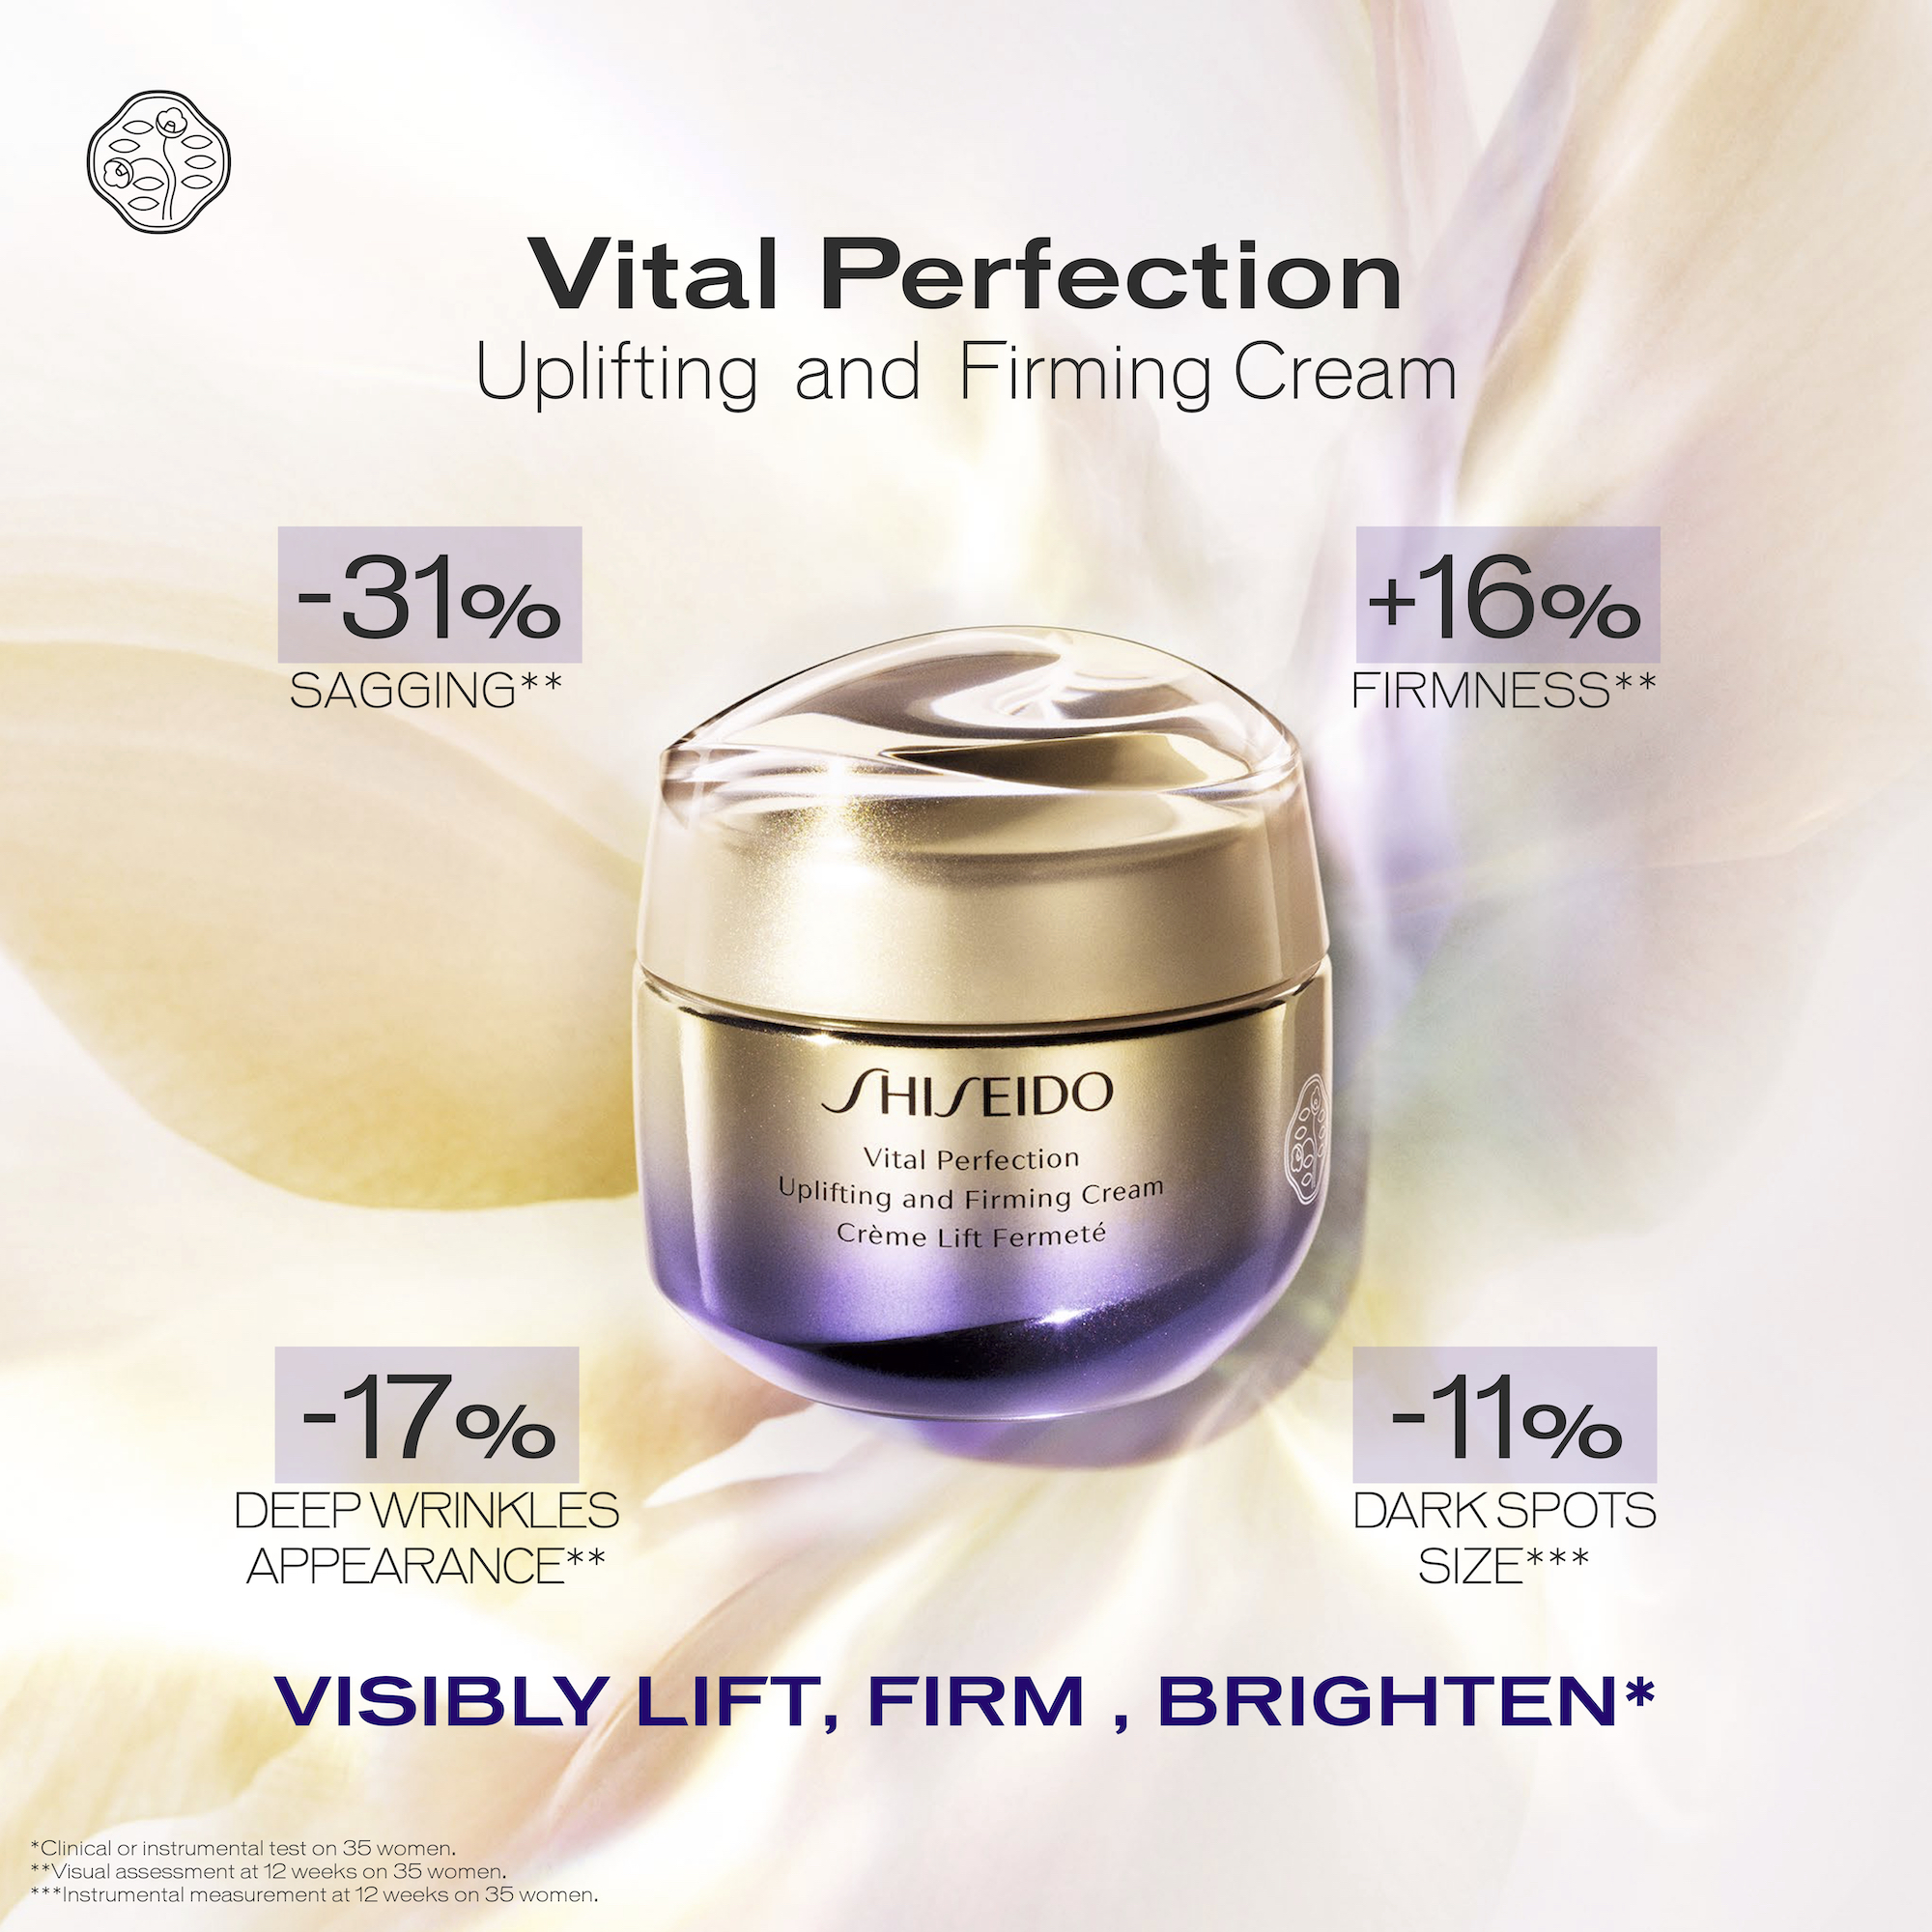 Shiseido Vital Perfection Uplifting and Firming Cream | Space NK